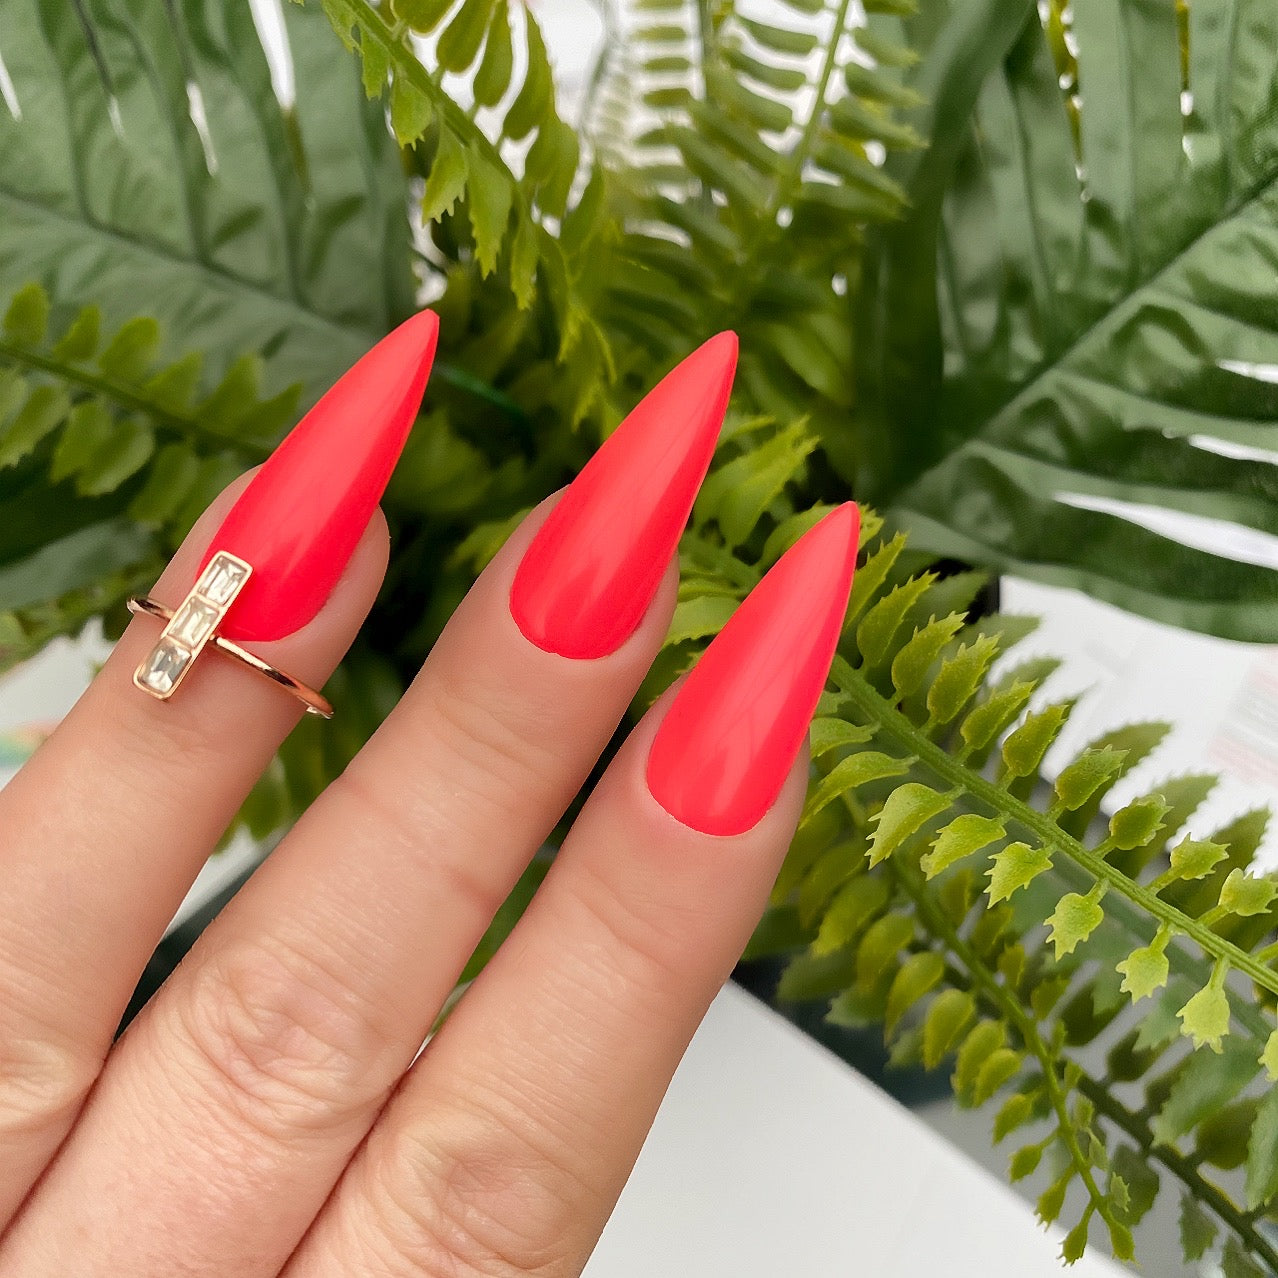 Red Nails 💅🏼 | Gallery posted by magen reaves | Lemon8